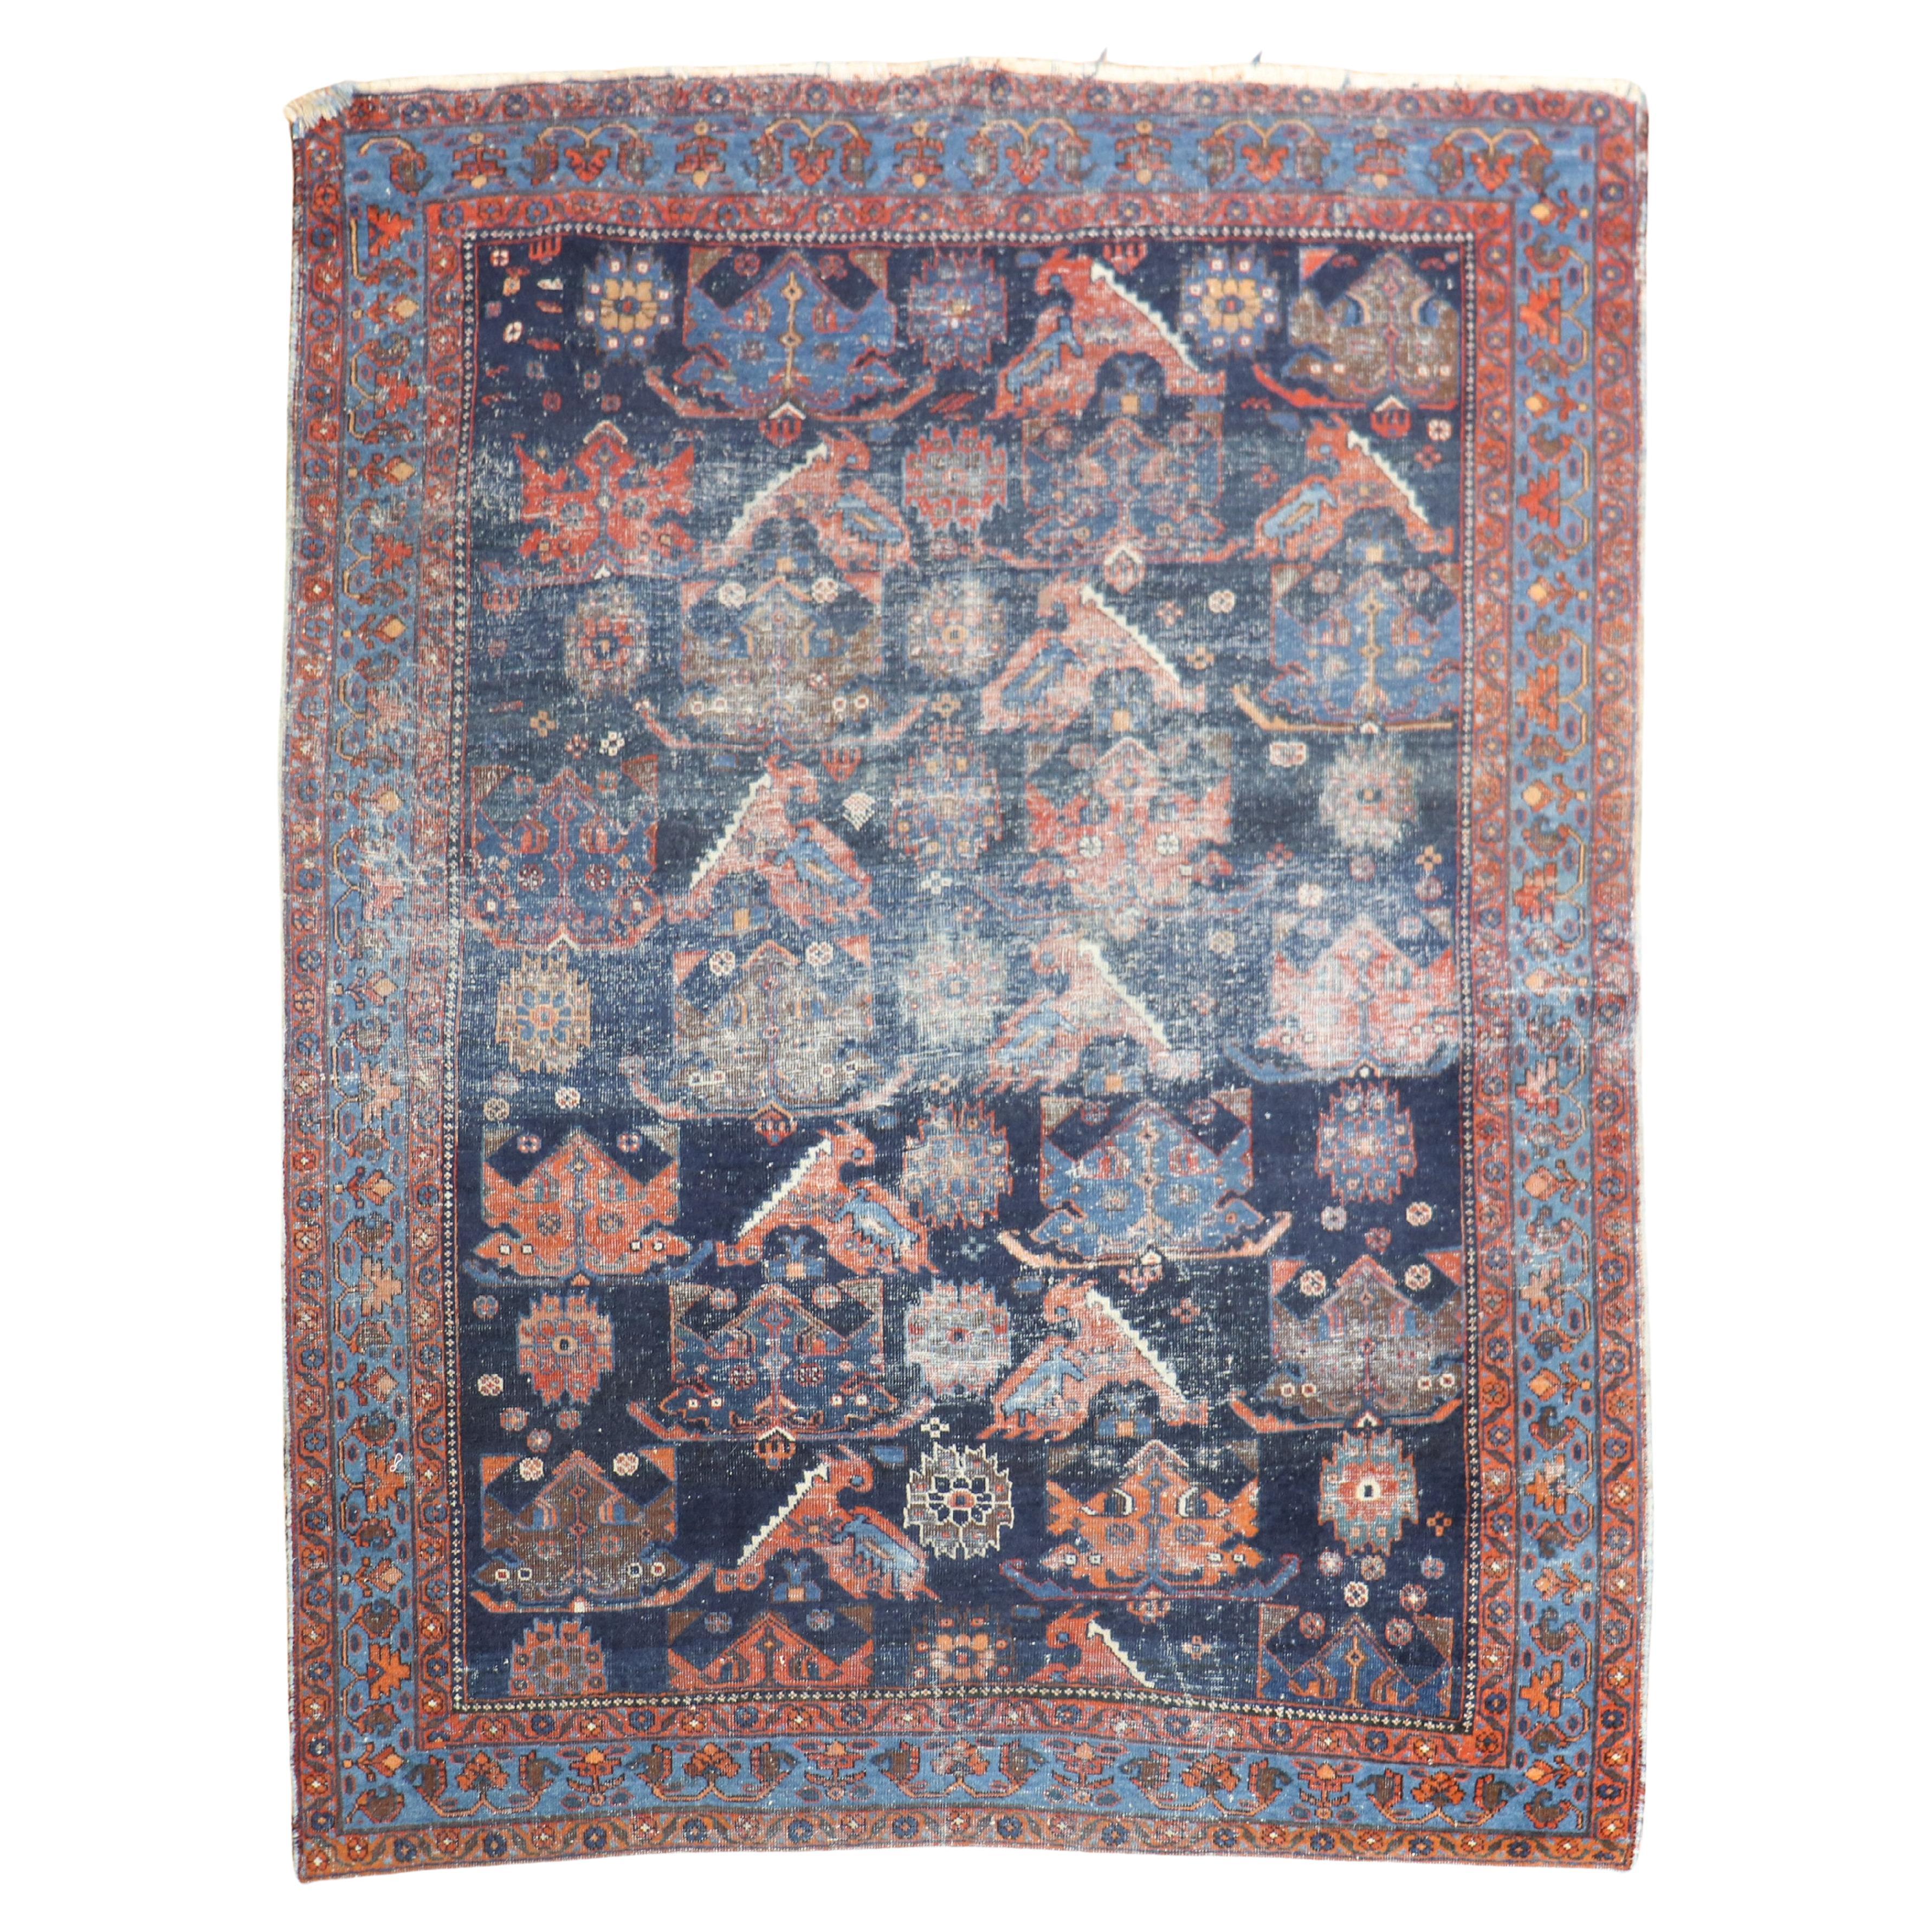 Zabihi Collection Worn Tribal Antique Persian Small Square Rug For Sale